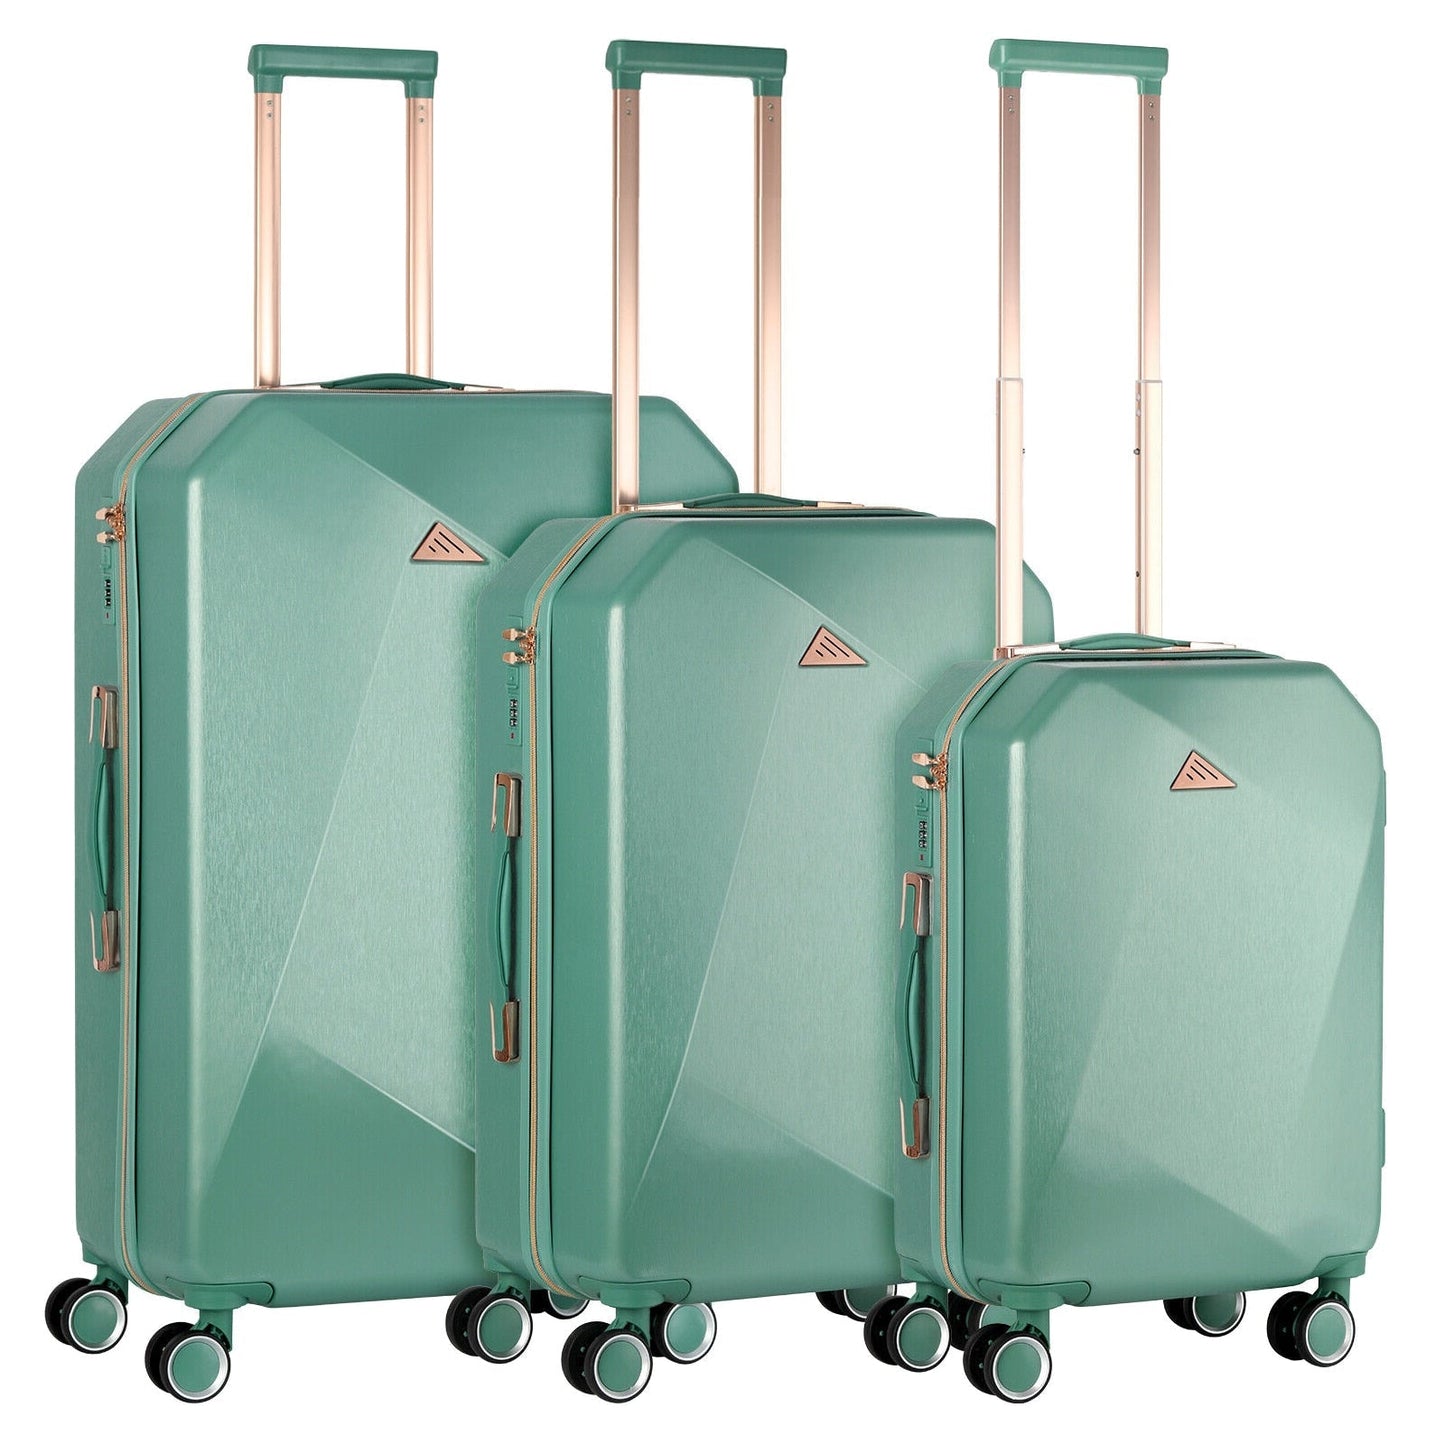 Business Travel Boarding Luggage Suitcase